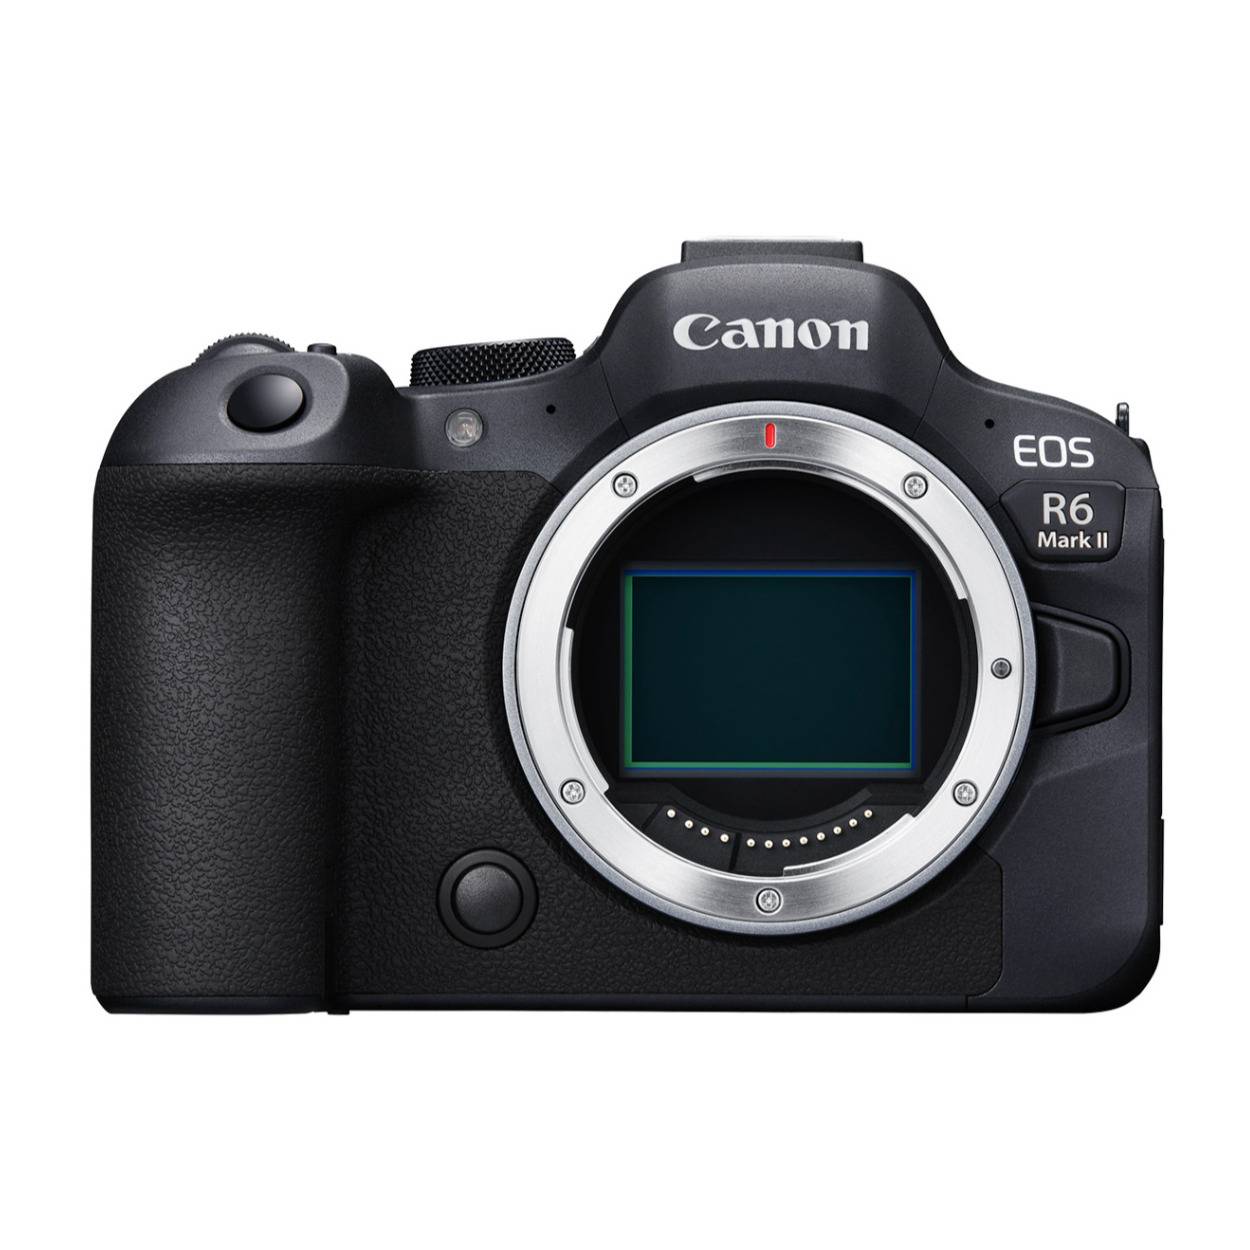 Canon EOS R6 Mark II Camera Body with Stop Motion Animation Firmware